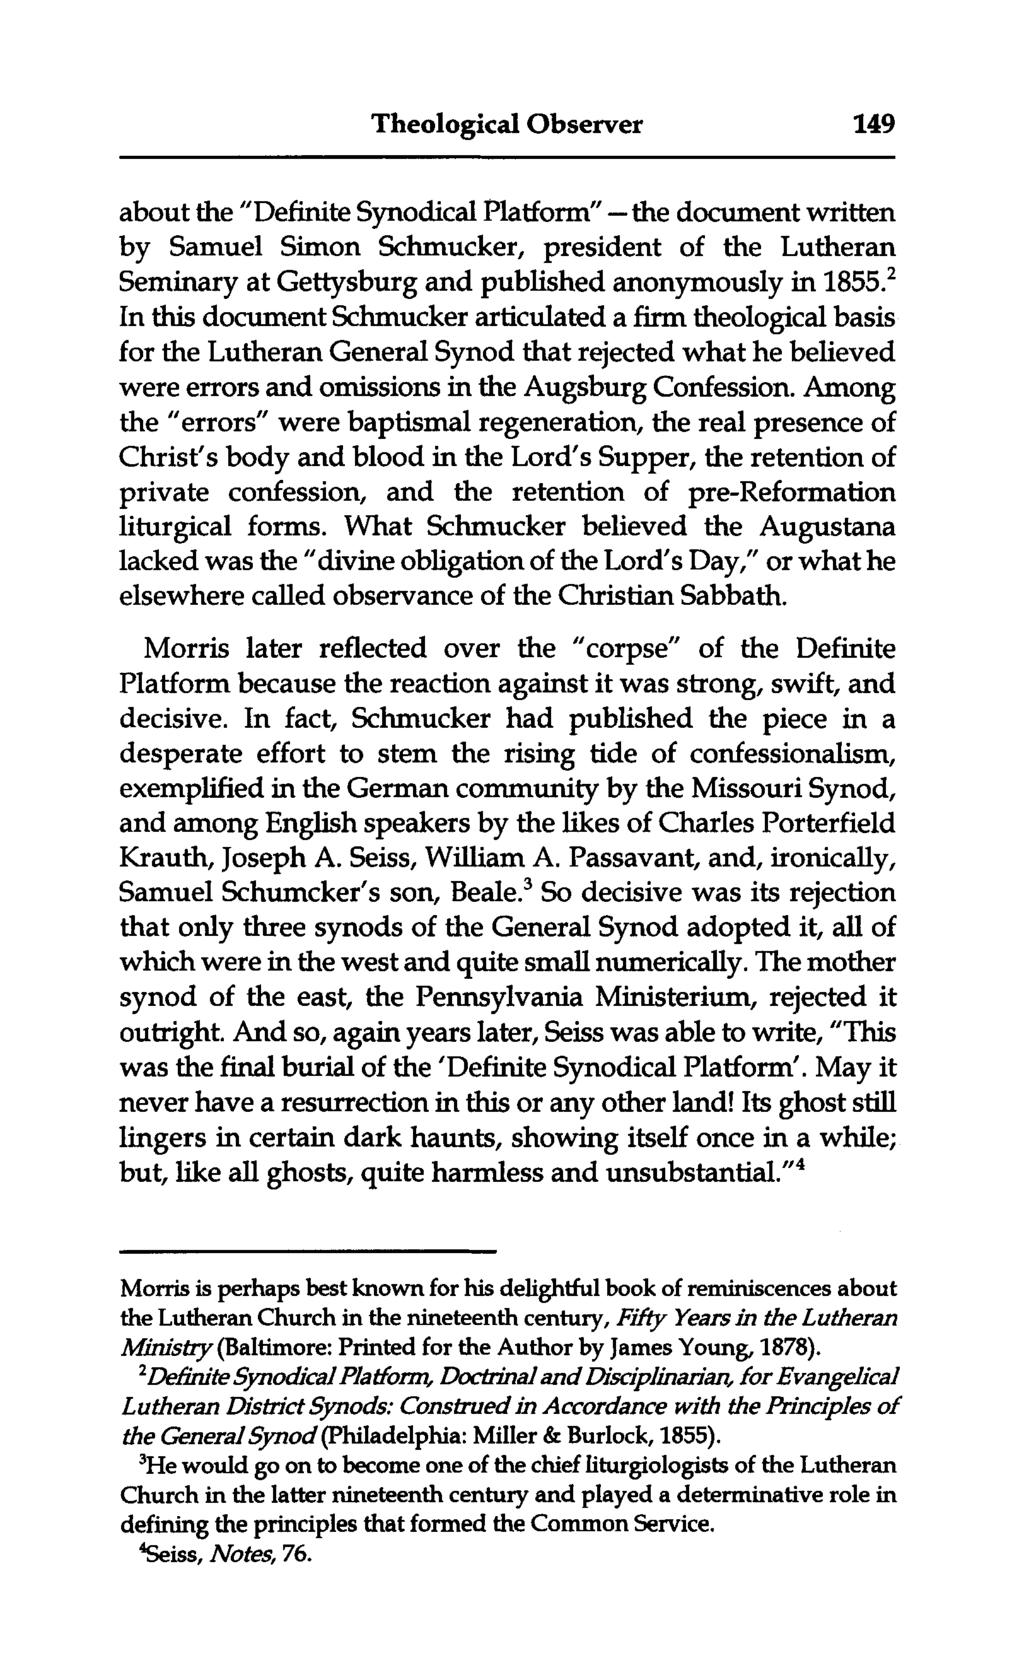 Theological Observer 149 about the "Definite Synodical Platform" -the document written by Samuel Simon Schmucker, president of the Lutheran Seminary at Gettysburg and published anonymously in 1855.